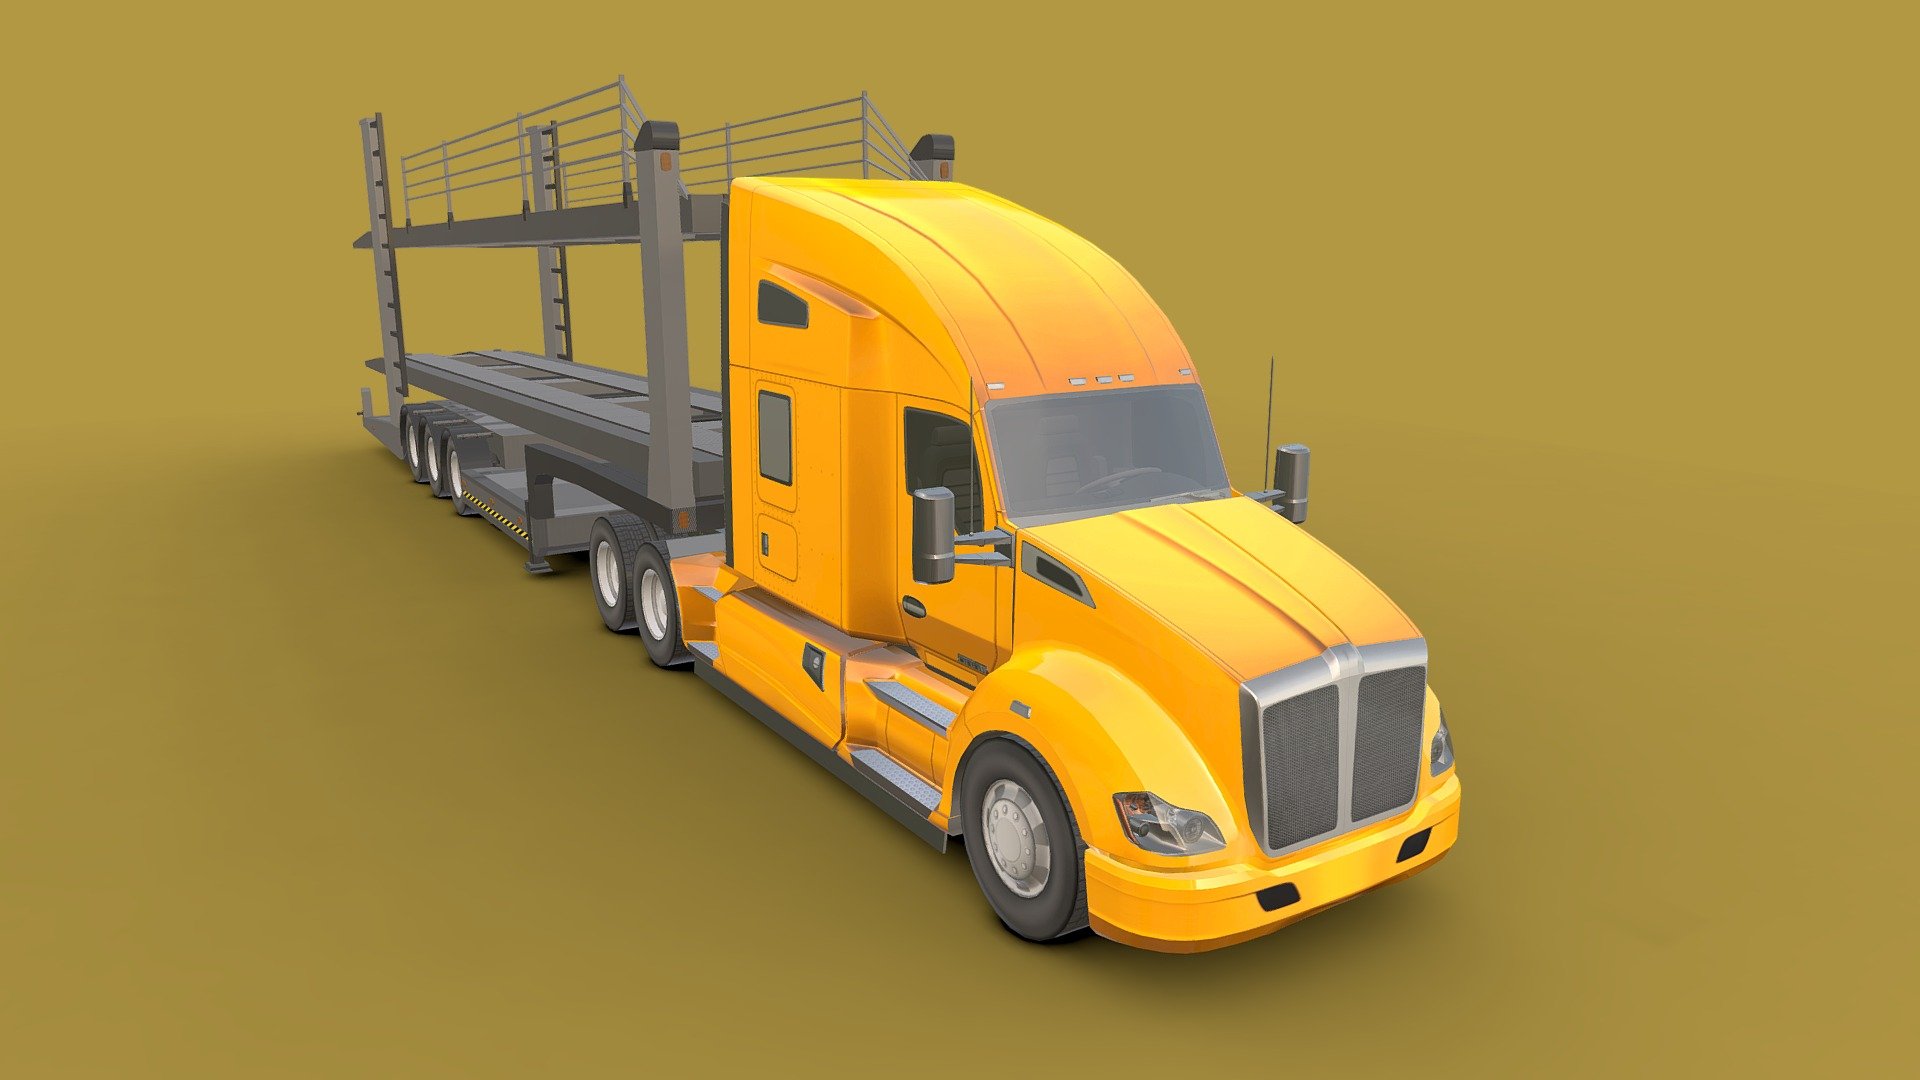 Kenworth T680 Truck 2020

Low-poly

Average poly count : 37,000

Average number of vertices : 32,000

Textures : 4096 / 2048

Formats .( FBX , OBJ , 3D MAX ).

High quality texture.

Isolated parts (Door, steering wheel, wheels, body).

Its dashboard is simple.

You can use this model in all games 3d model